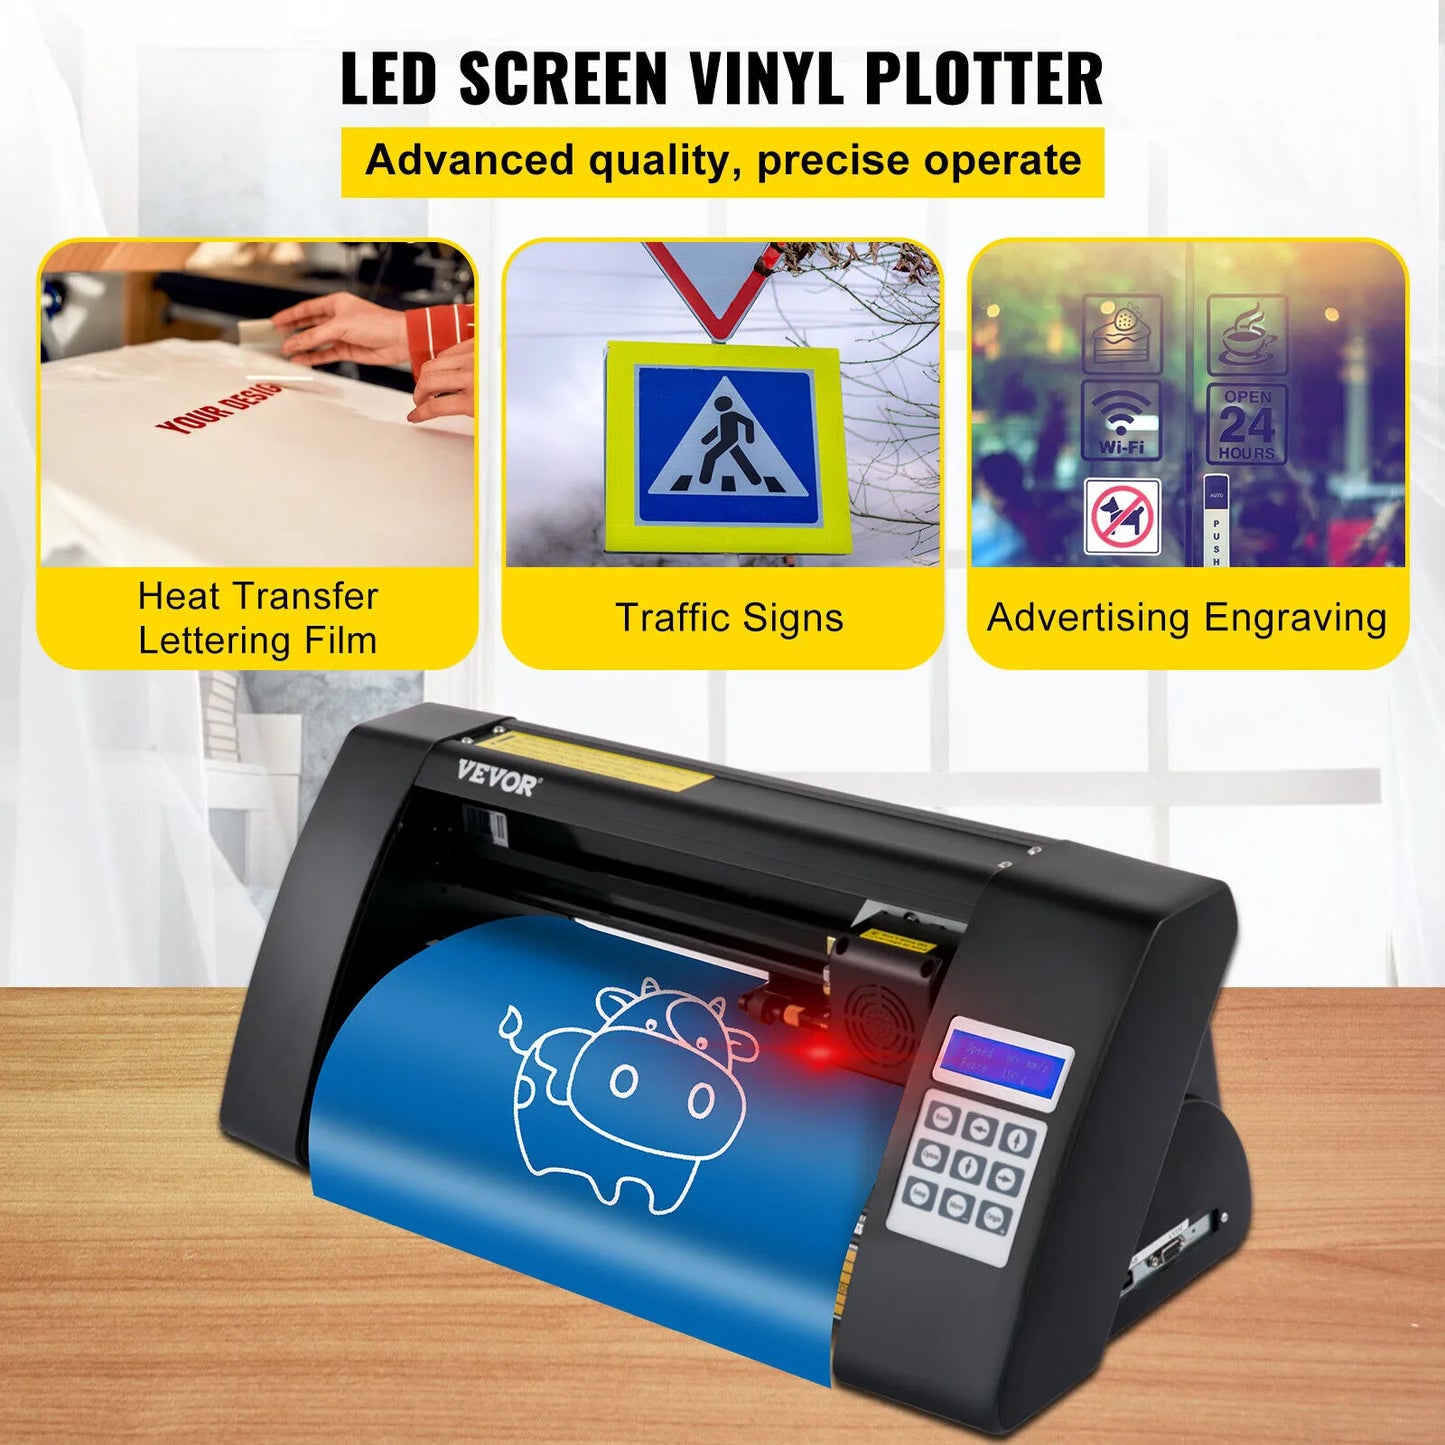 VEVOR 14" Semi-Automatic Vinyl Cutter Plotter 375mm Signmaster Cutting w/ Papers LED Screen Plotter Cutter